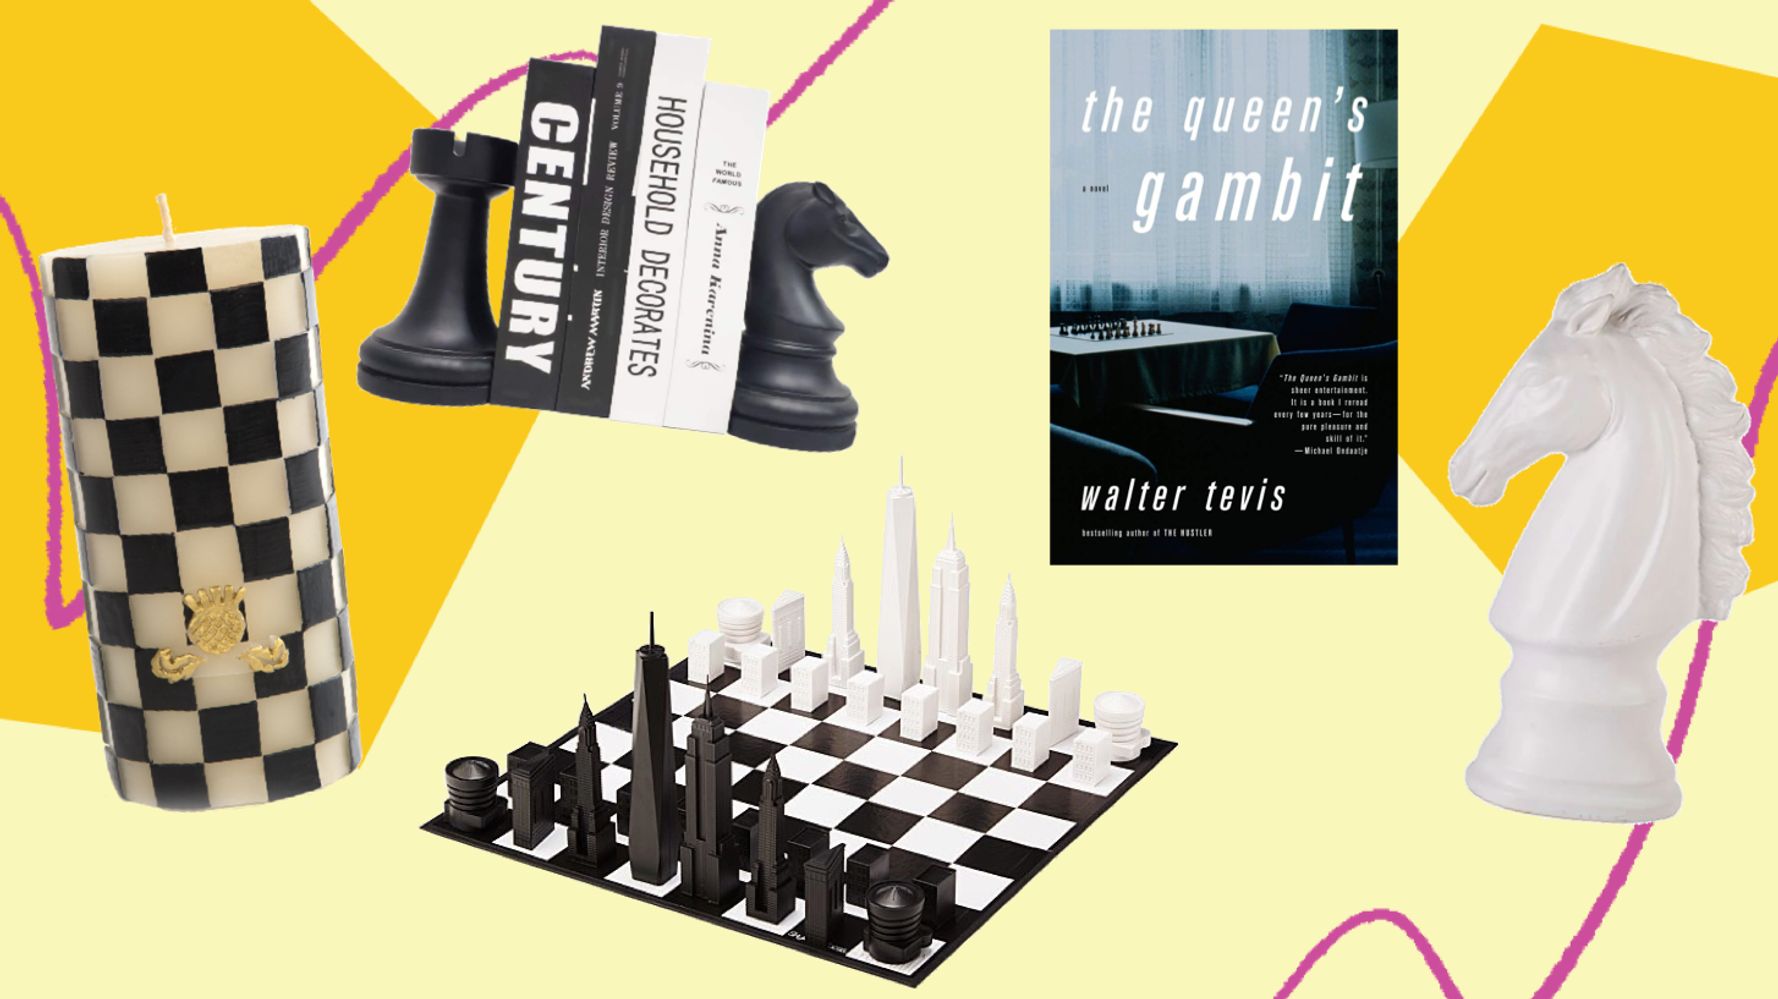 The Queen's Gambit' Makes Chess Kind of Sexy